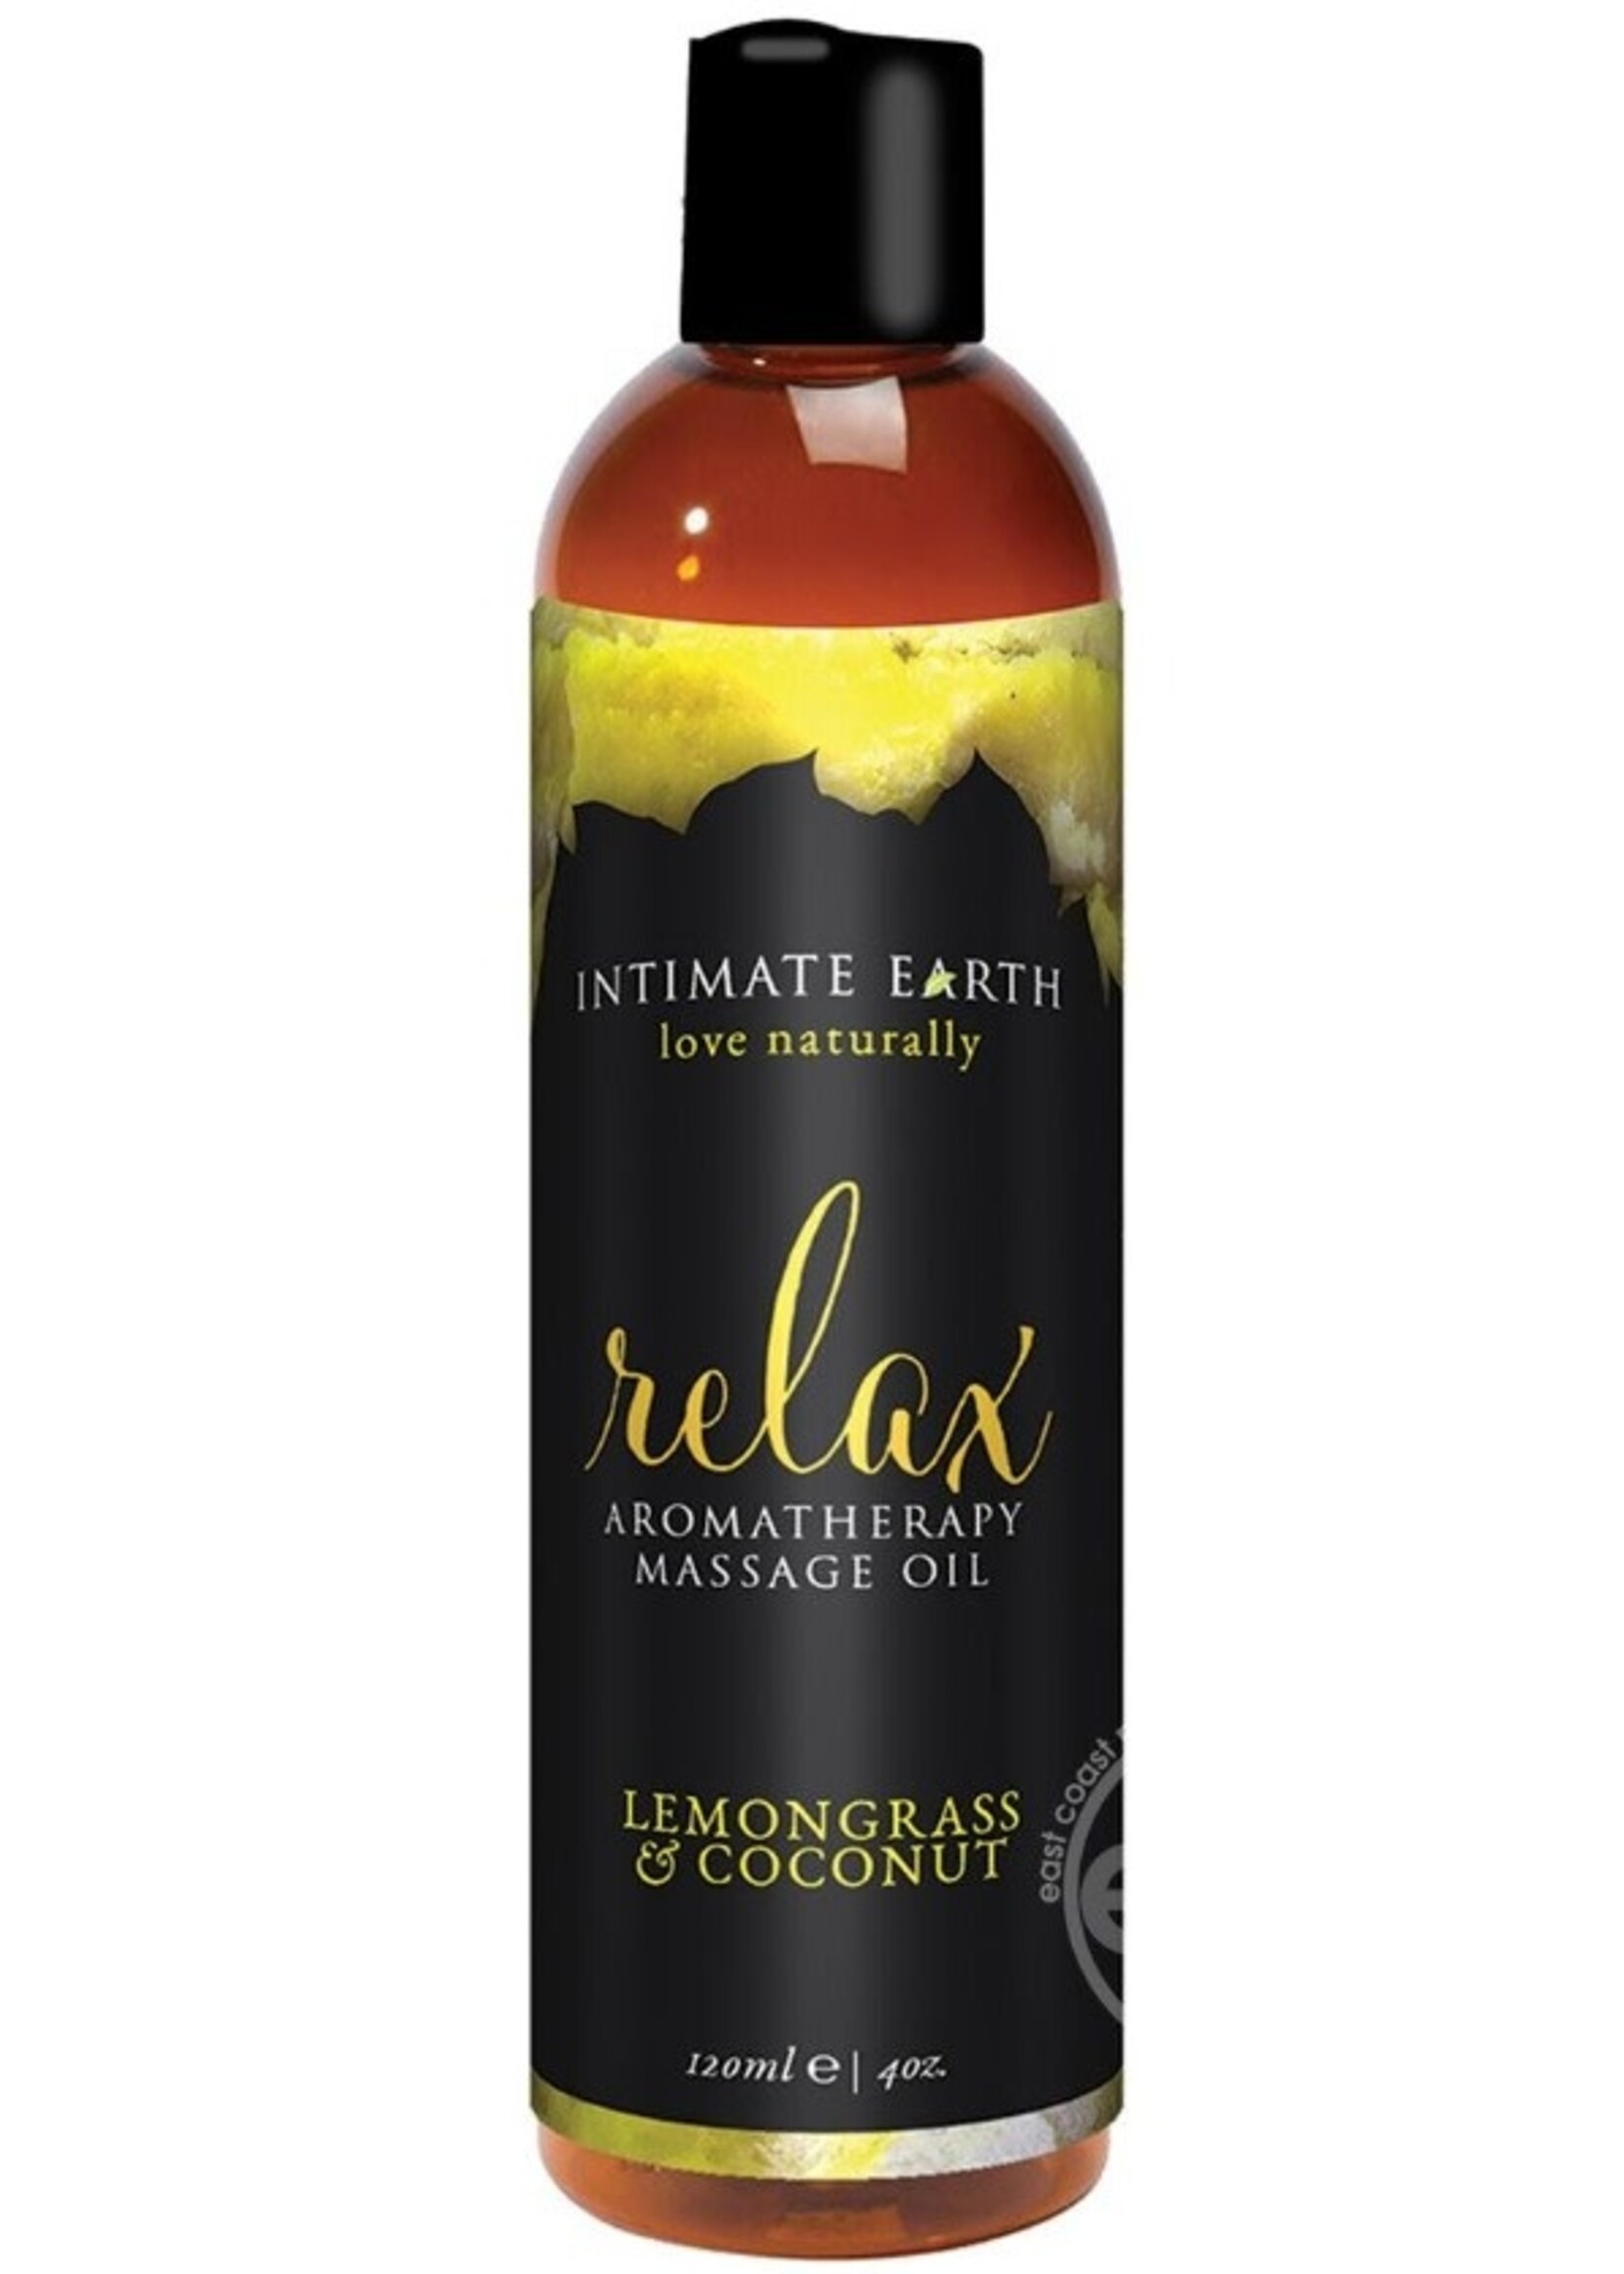 Intimate Earth Relax Aromatherapy Massage Oil Lemongrass & Coconut 4oz